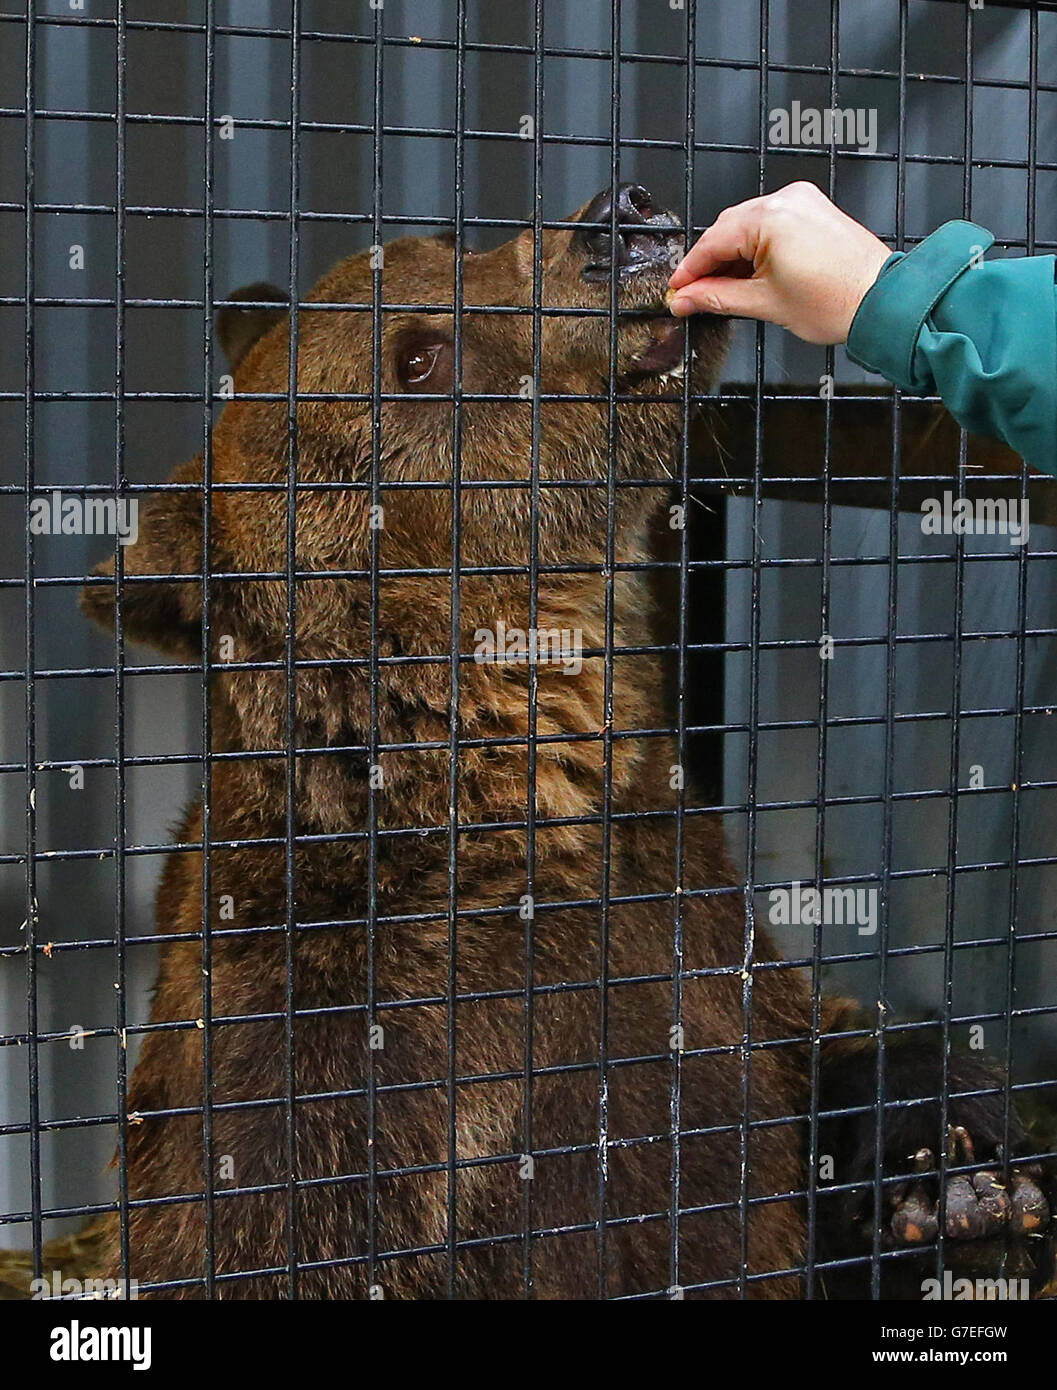 Milcho, a European Brown Bear, peers out of his quarantine enclosure at the Wildwood Animal Trust in Herne, Kent, following being rescued from an abandoned bear breeding centre in Bulgaria suffering from neglect. Stock Photo